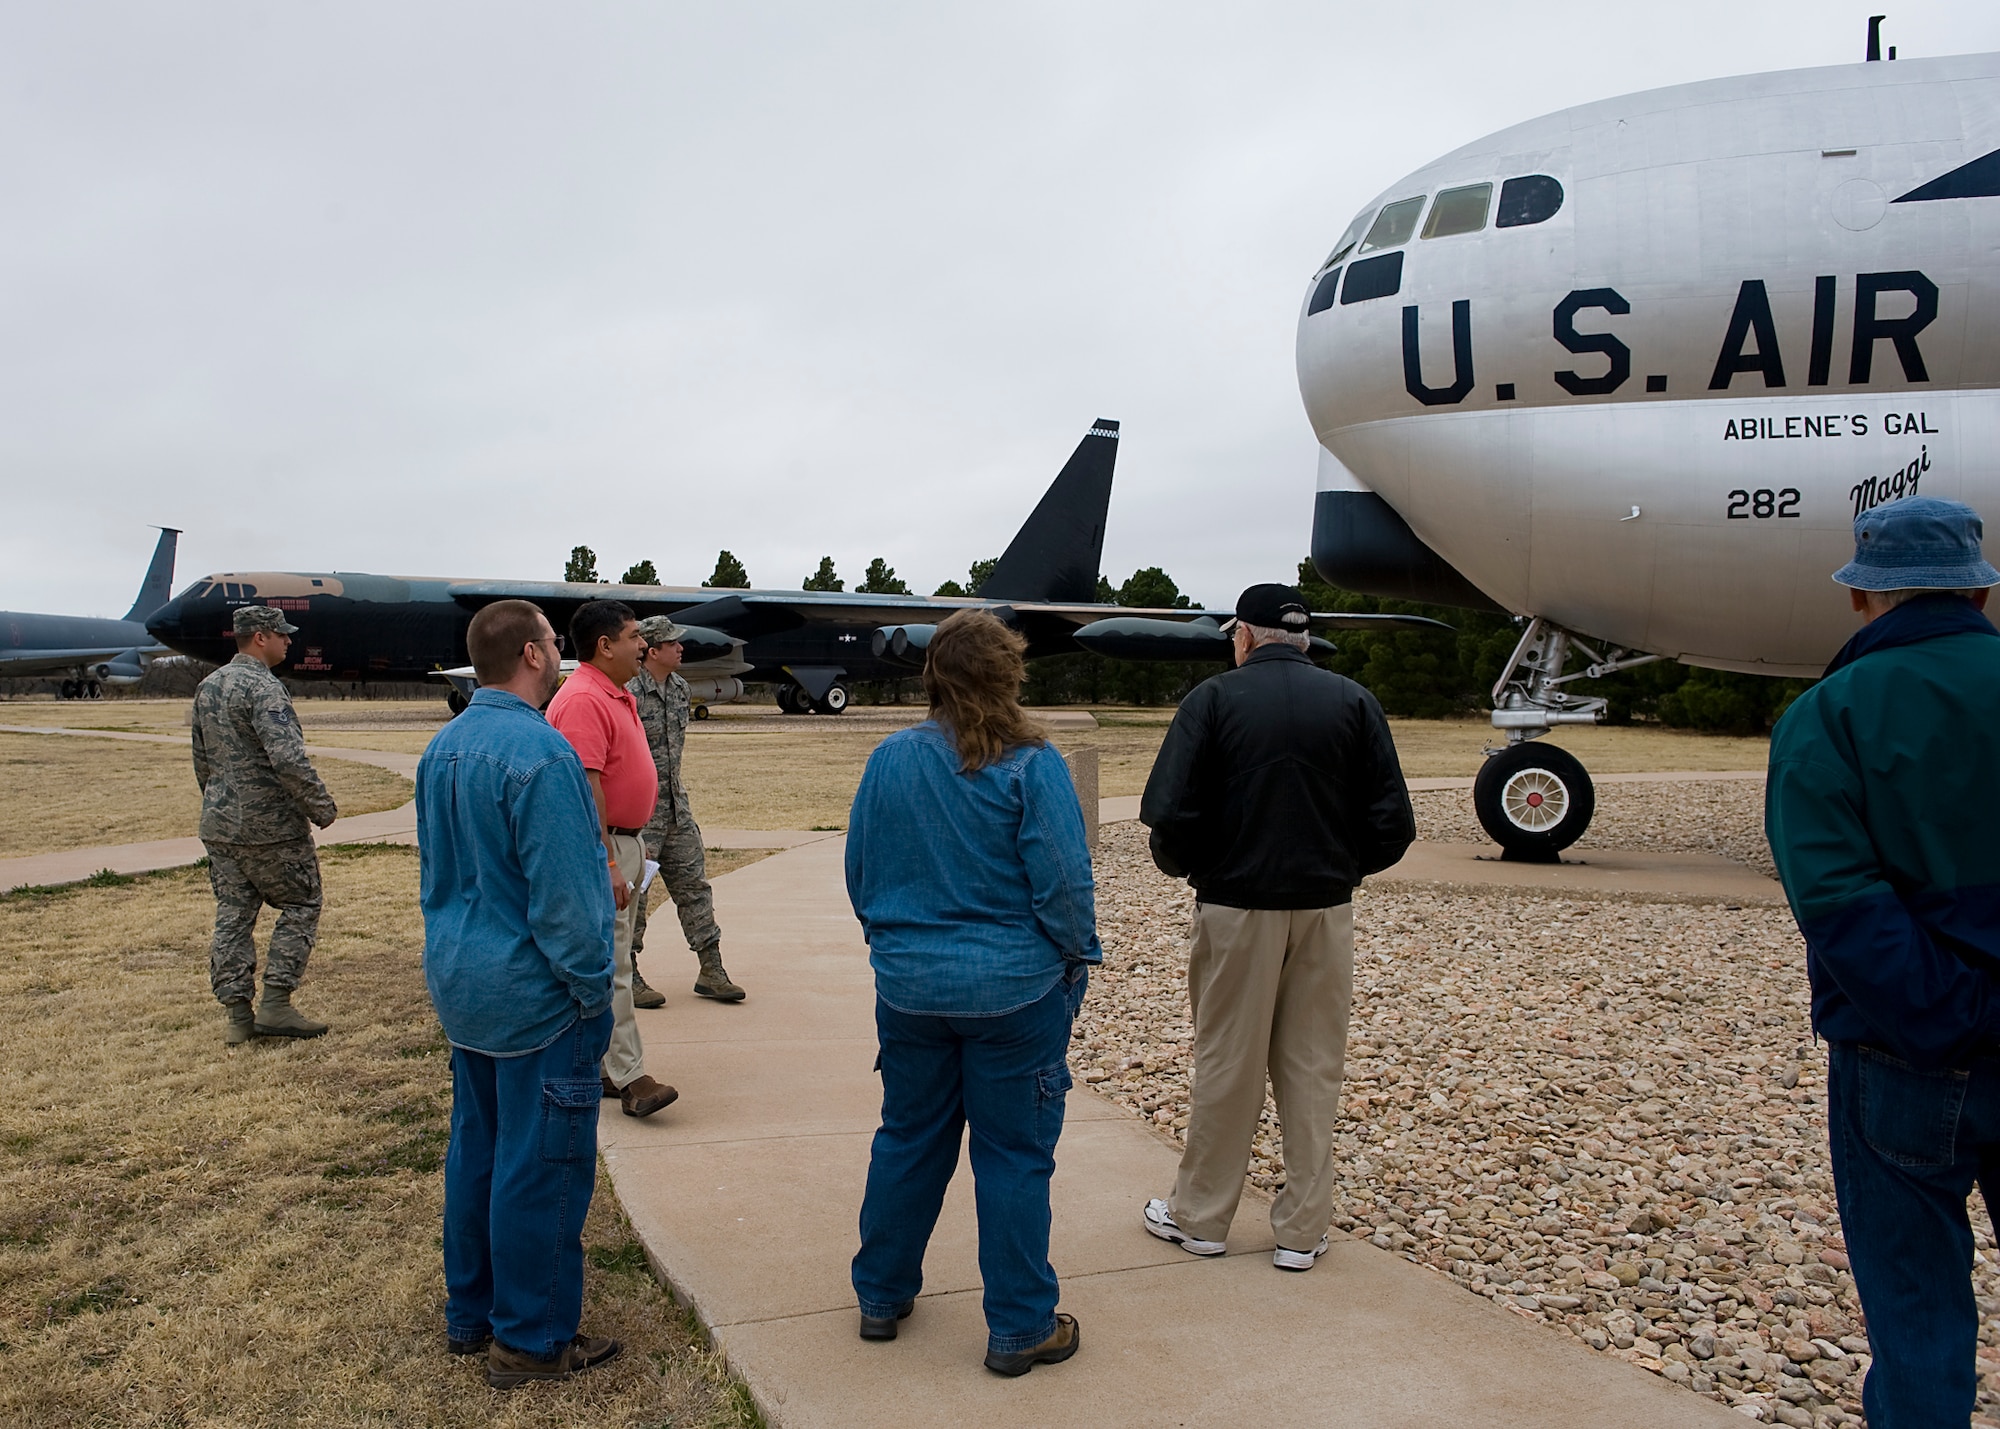 Abilene residents learn about the KC-97L, Stratofreighter, during a general public tour March 8, 2013 at Dyess Air Force Base, Texas. Individuals who otherwise do not have access to the base are able to take a general public tour the second Friday of each month. Tours consist of visiting the Dyess Museum, walking a path along all 30 static aircraft in the Air Park and a windshield tour of the base. Tours start at 8:30 a.m. and last about two hours. For more information, logon to www.dyess.af.mil/basetours.asp. (U.S. Air Force photo by Airman 1st Class Damon Kasberg/ Released)